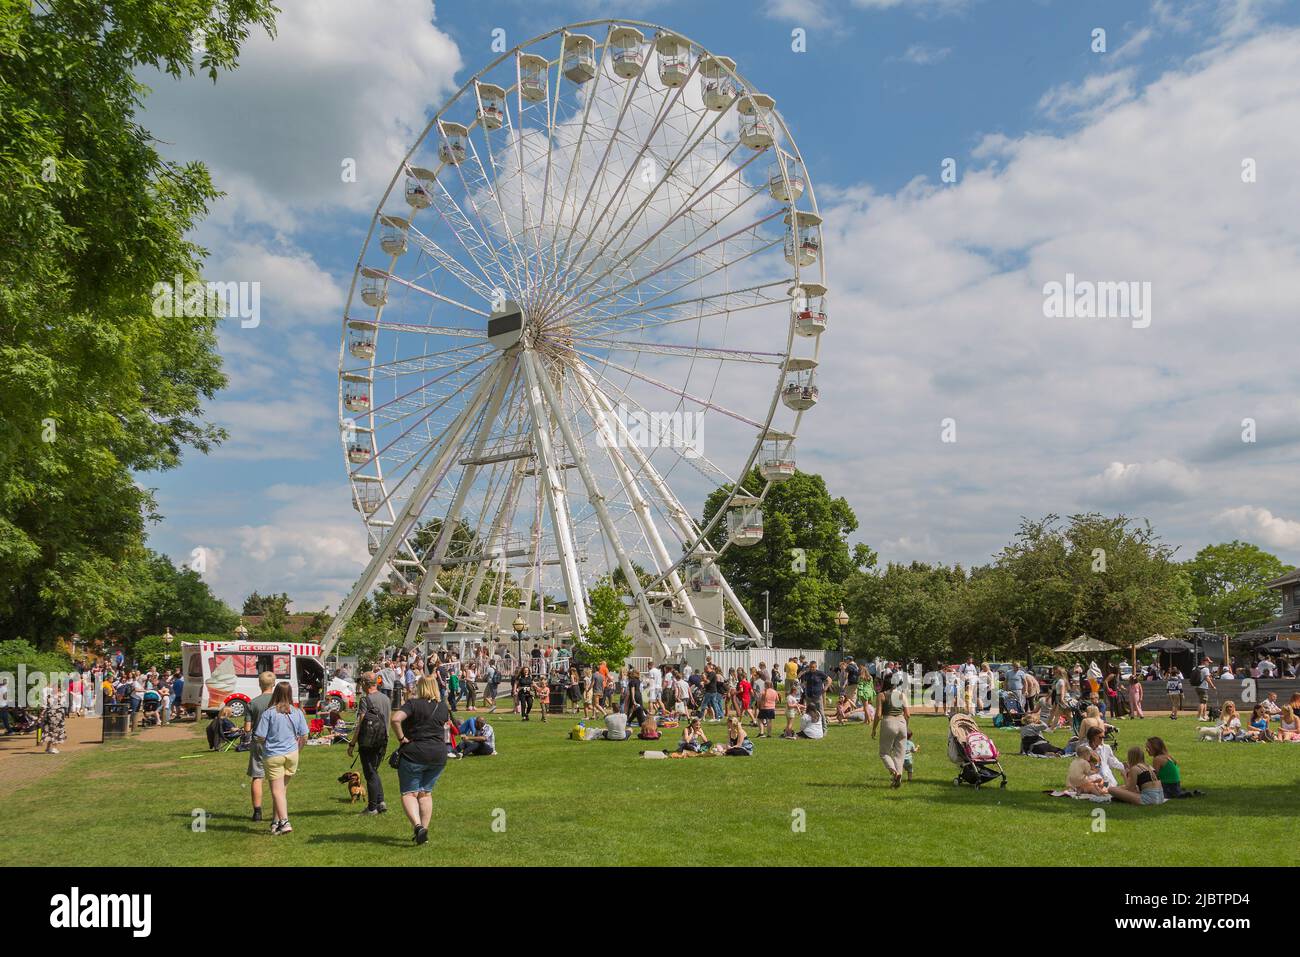 Families enjoy the weather in a park on a sunny summer day, Above them people ride in the big wheel. Stock Photo